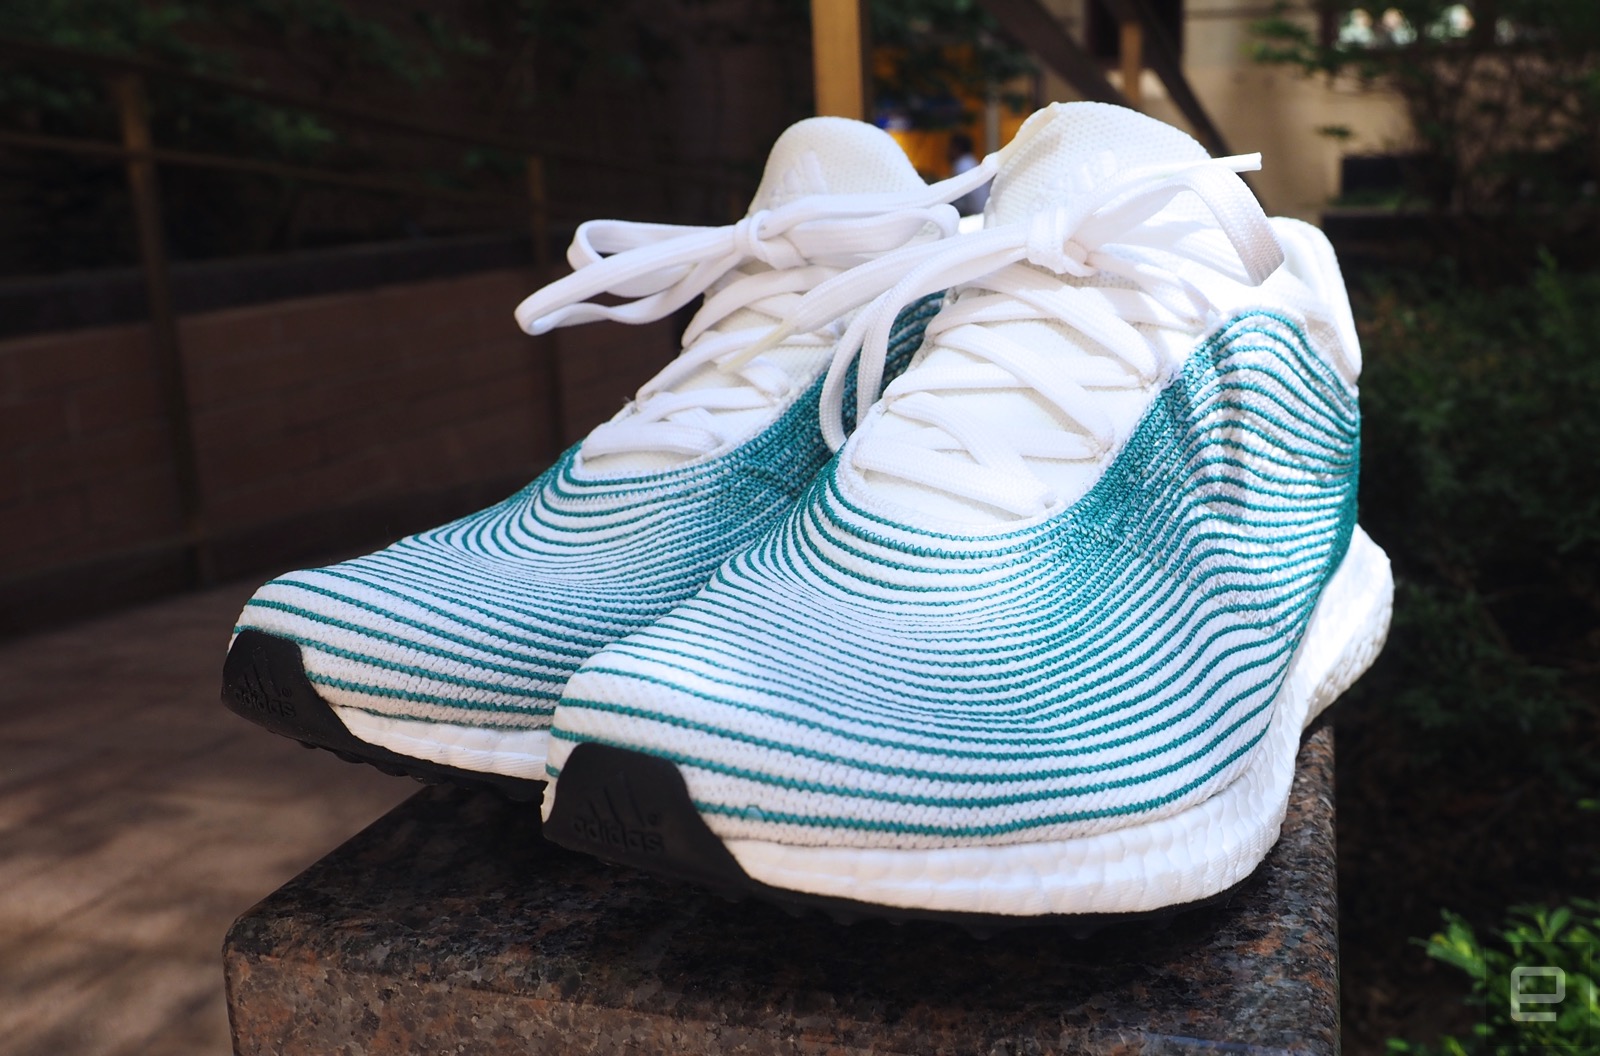 Competir Sin sentido Personas mayores Adidas gets creative with shoes made from recycled ocean plastic | Engadget